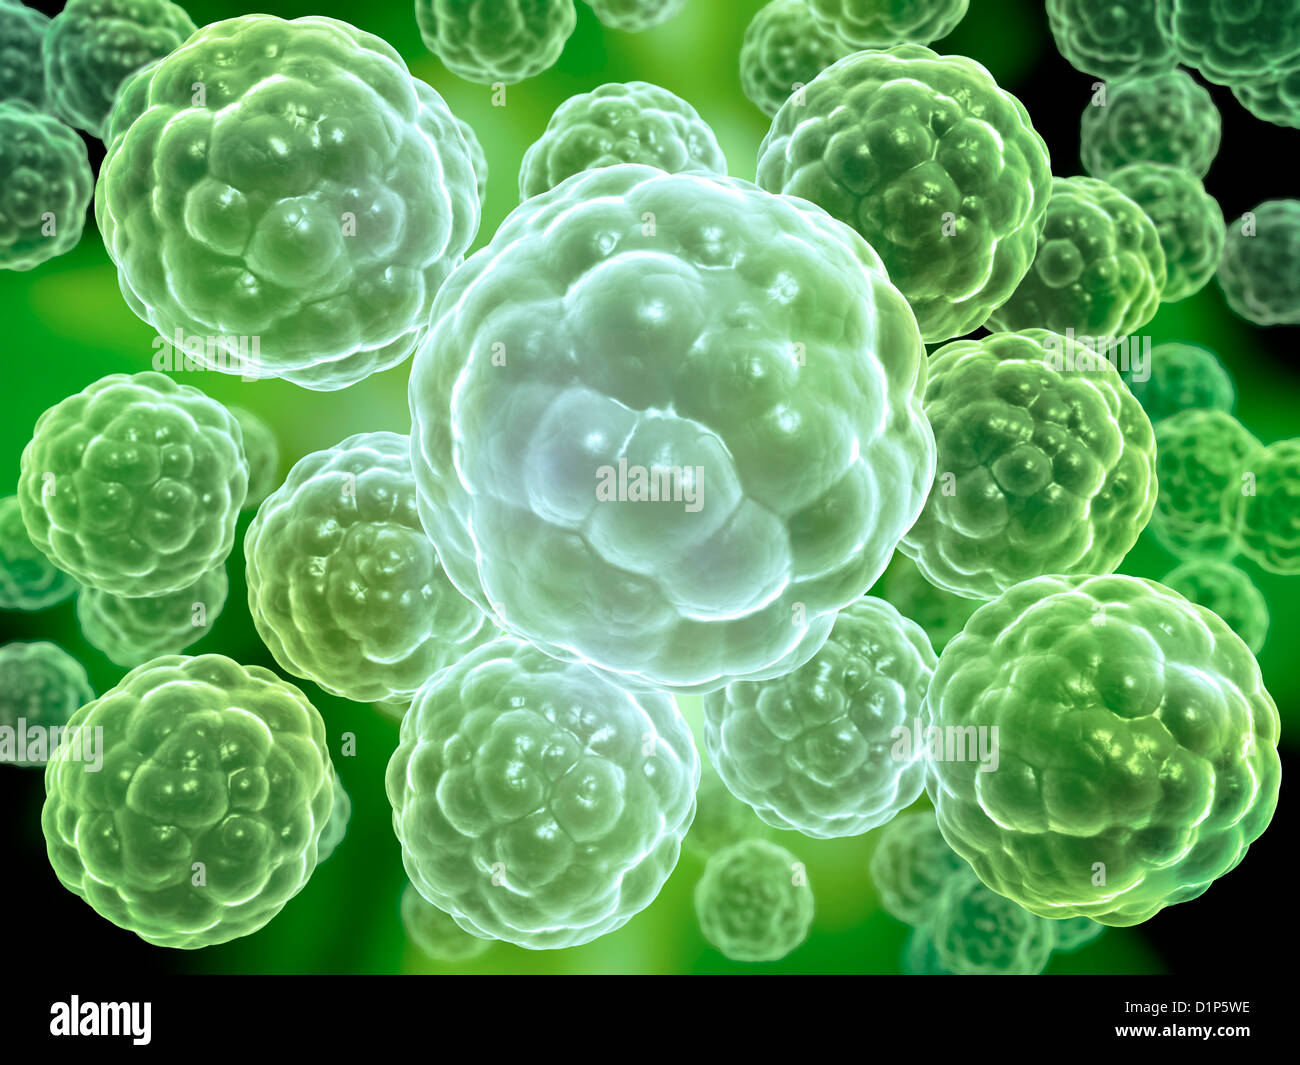 Multicellular organism, conceptual image Stock Photo